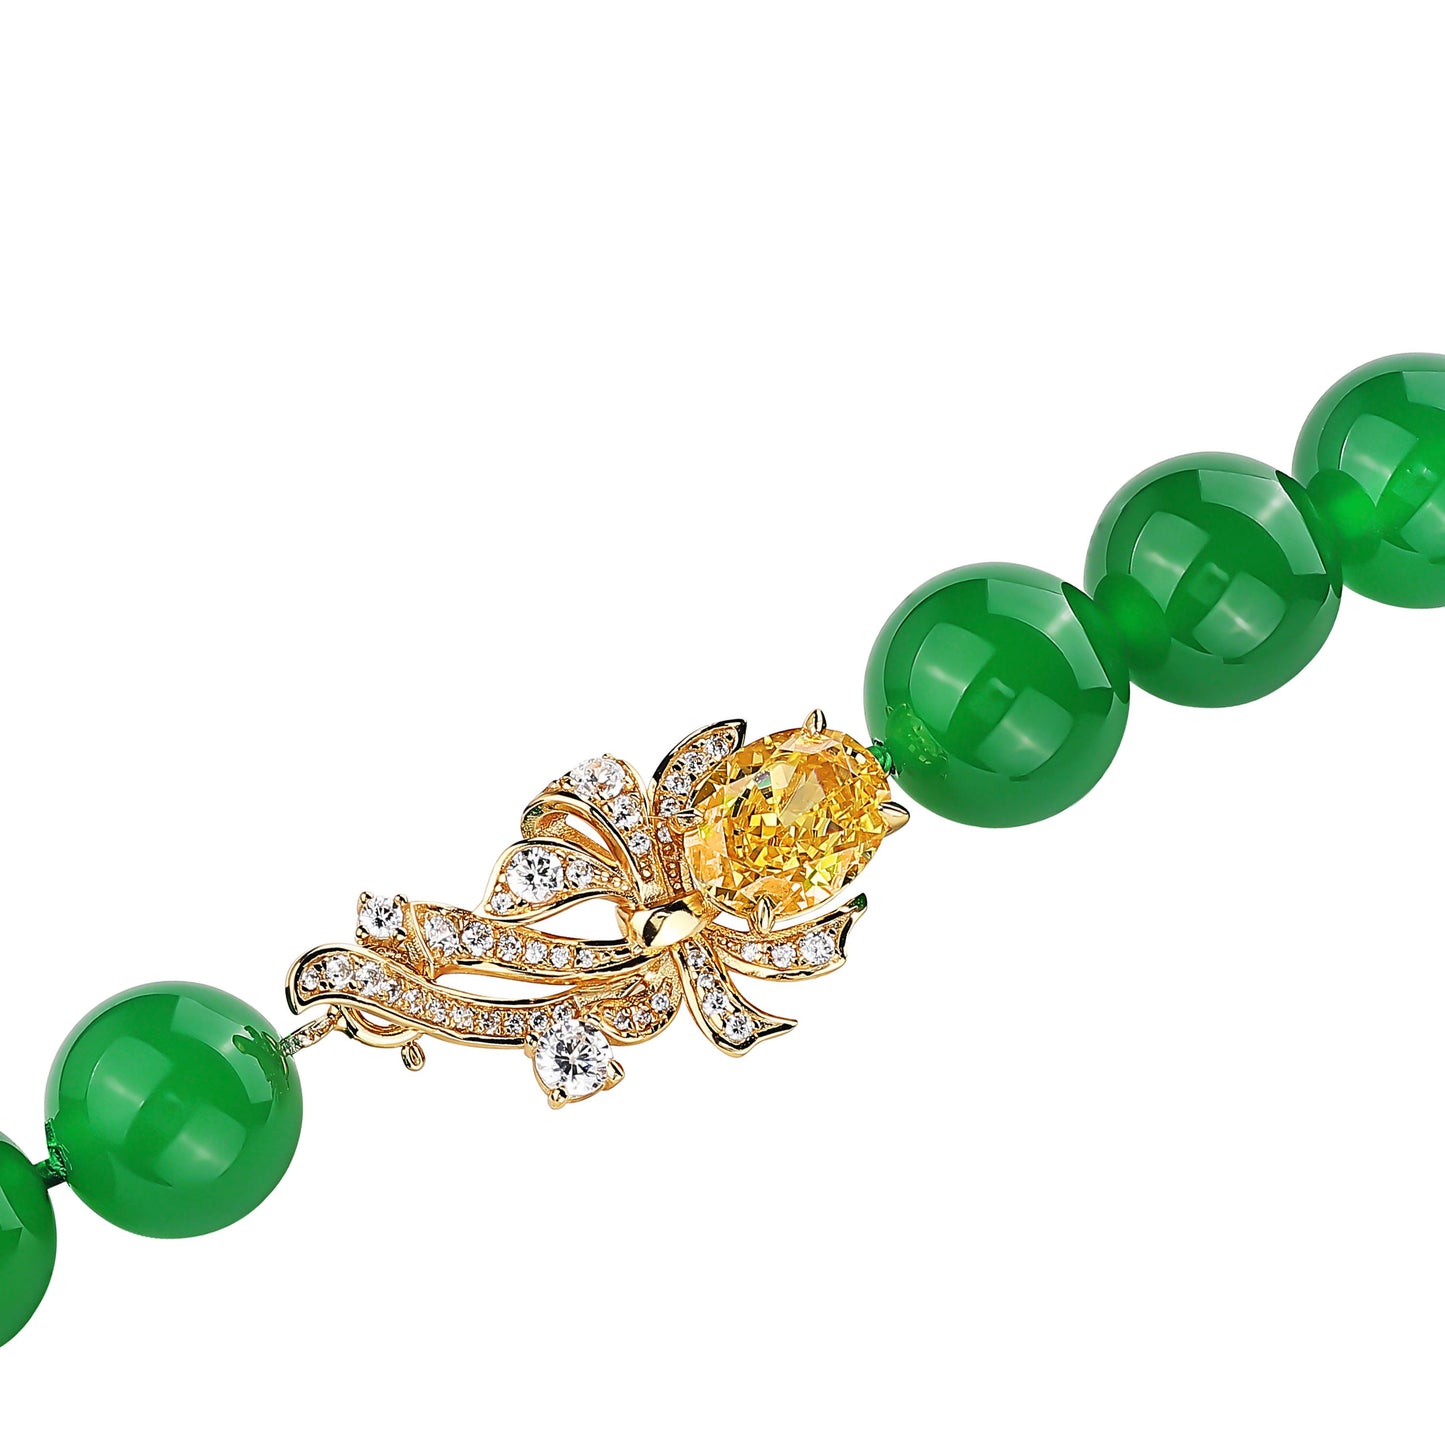 "Treasure beads" Long Gold&Green Beaded detailed retro Long necklace